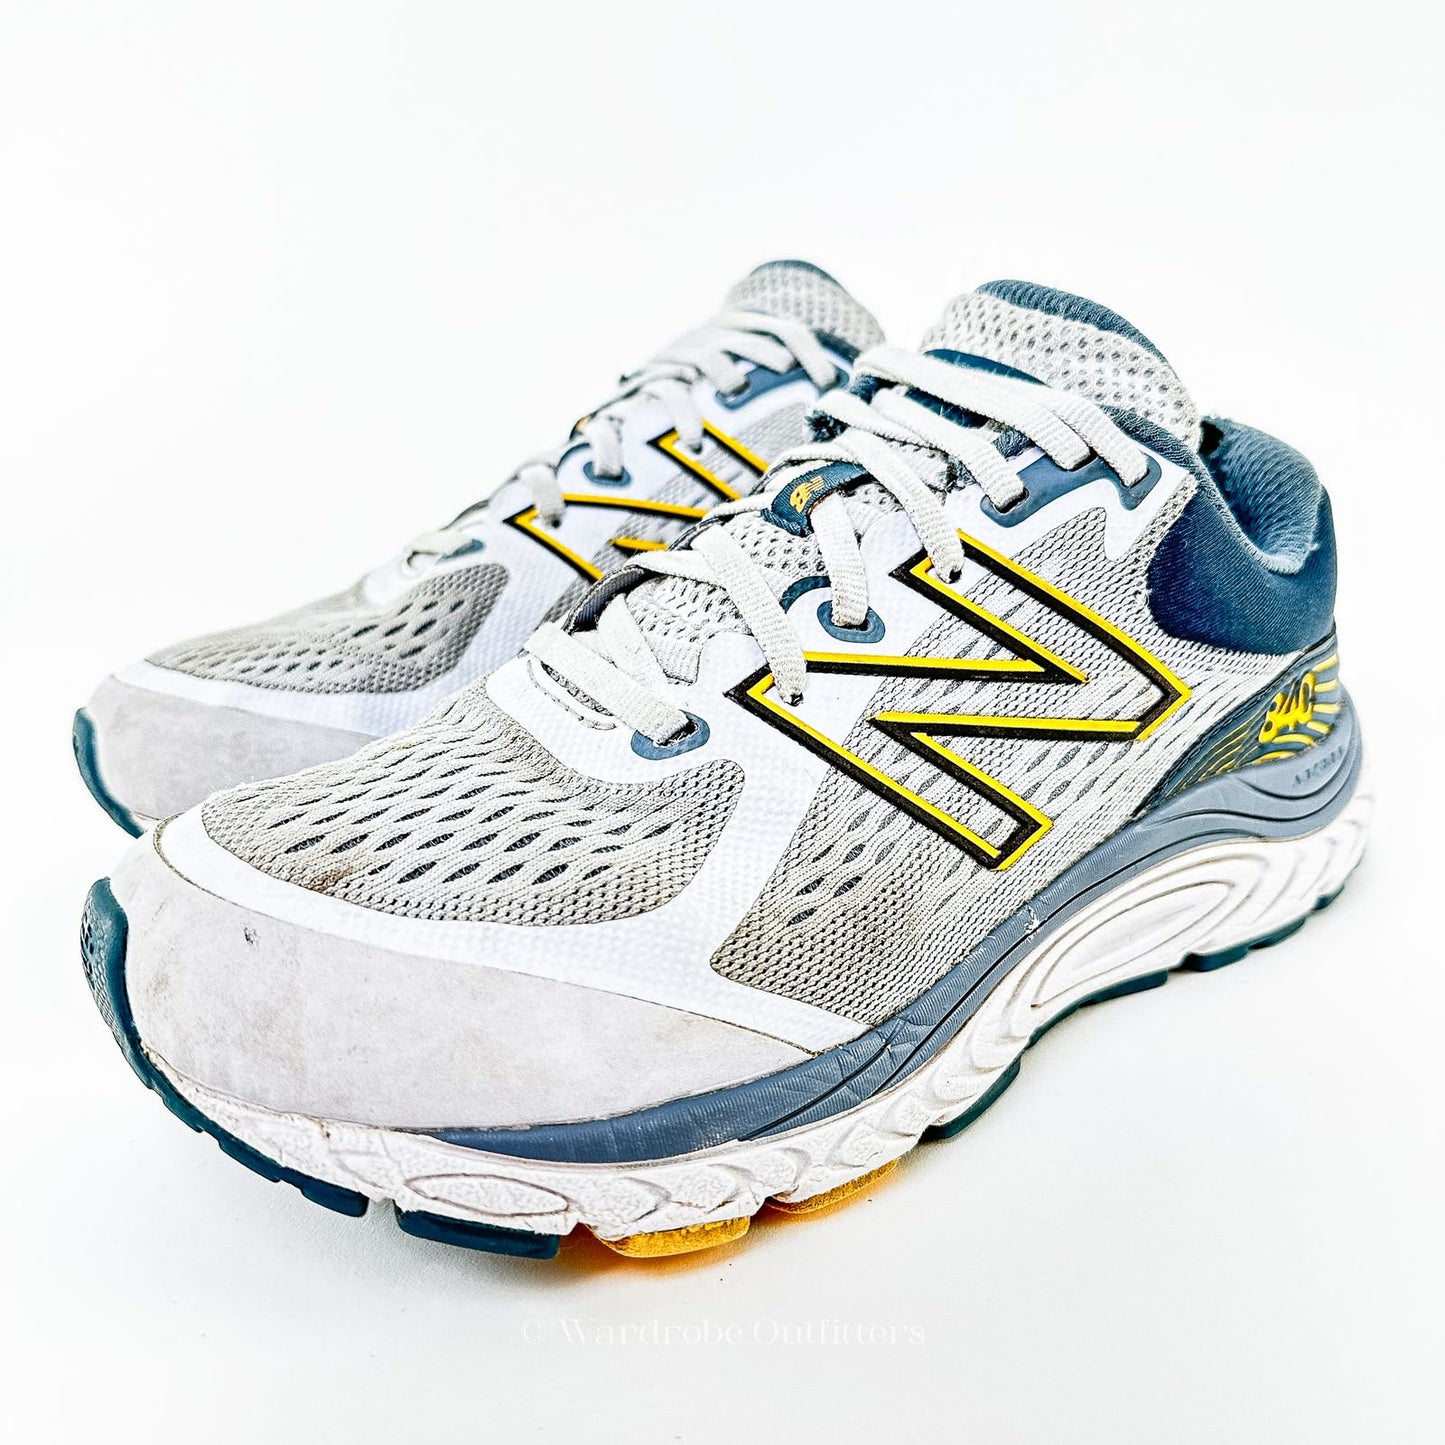 New Balance 840v5 2E Wide 'Silent Grey' Sneakers